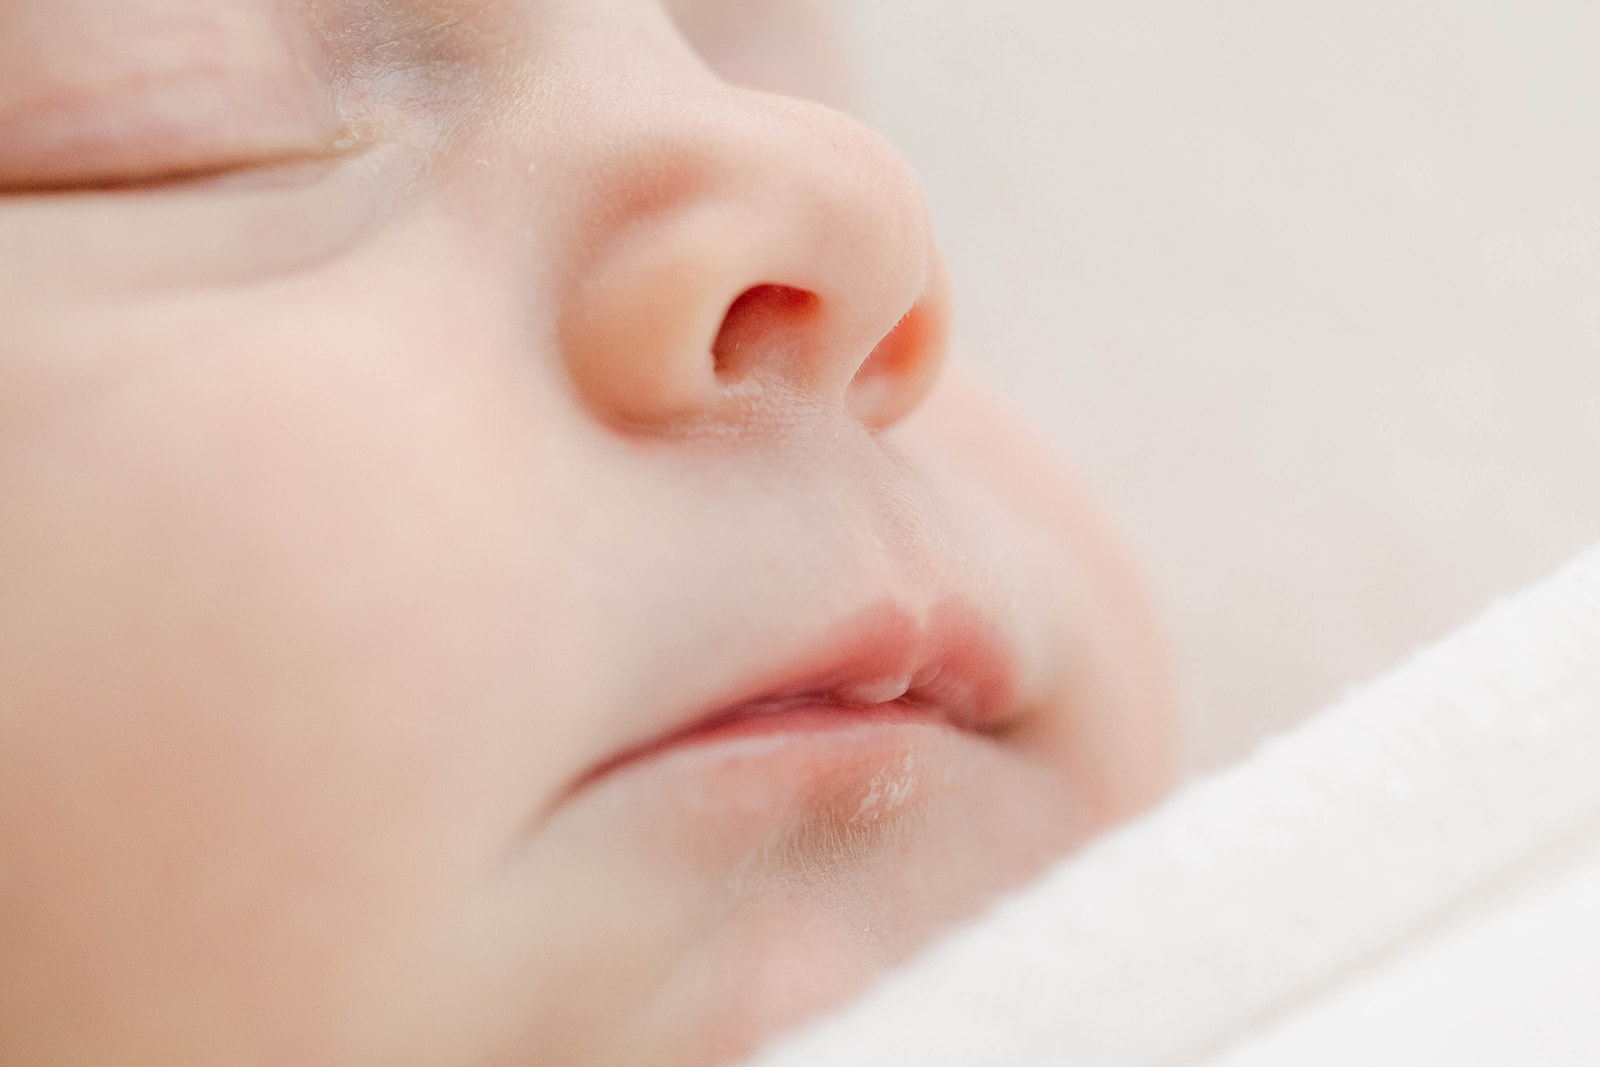 Details of a sleeping newborn baby face after meeting with Houston Postpartum Doulas